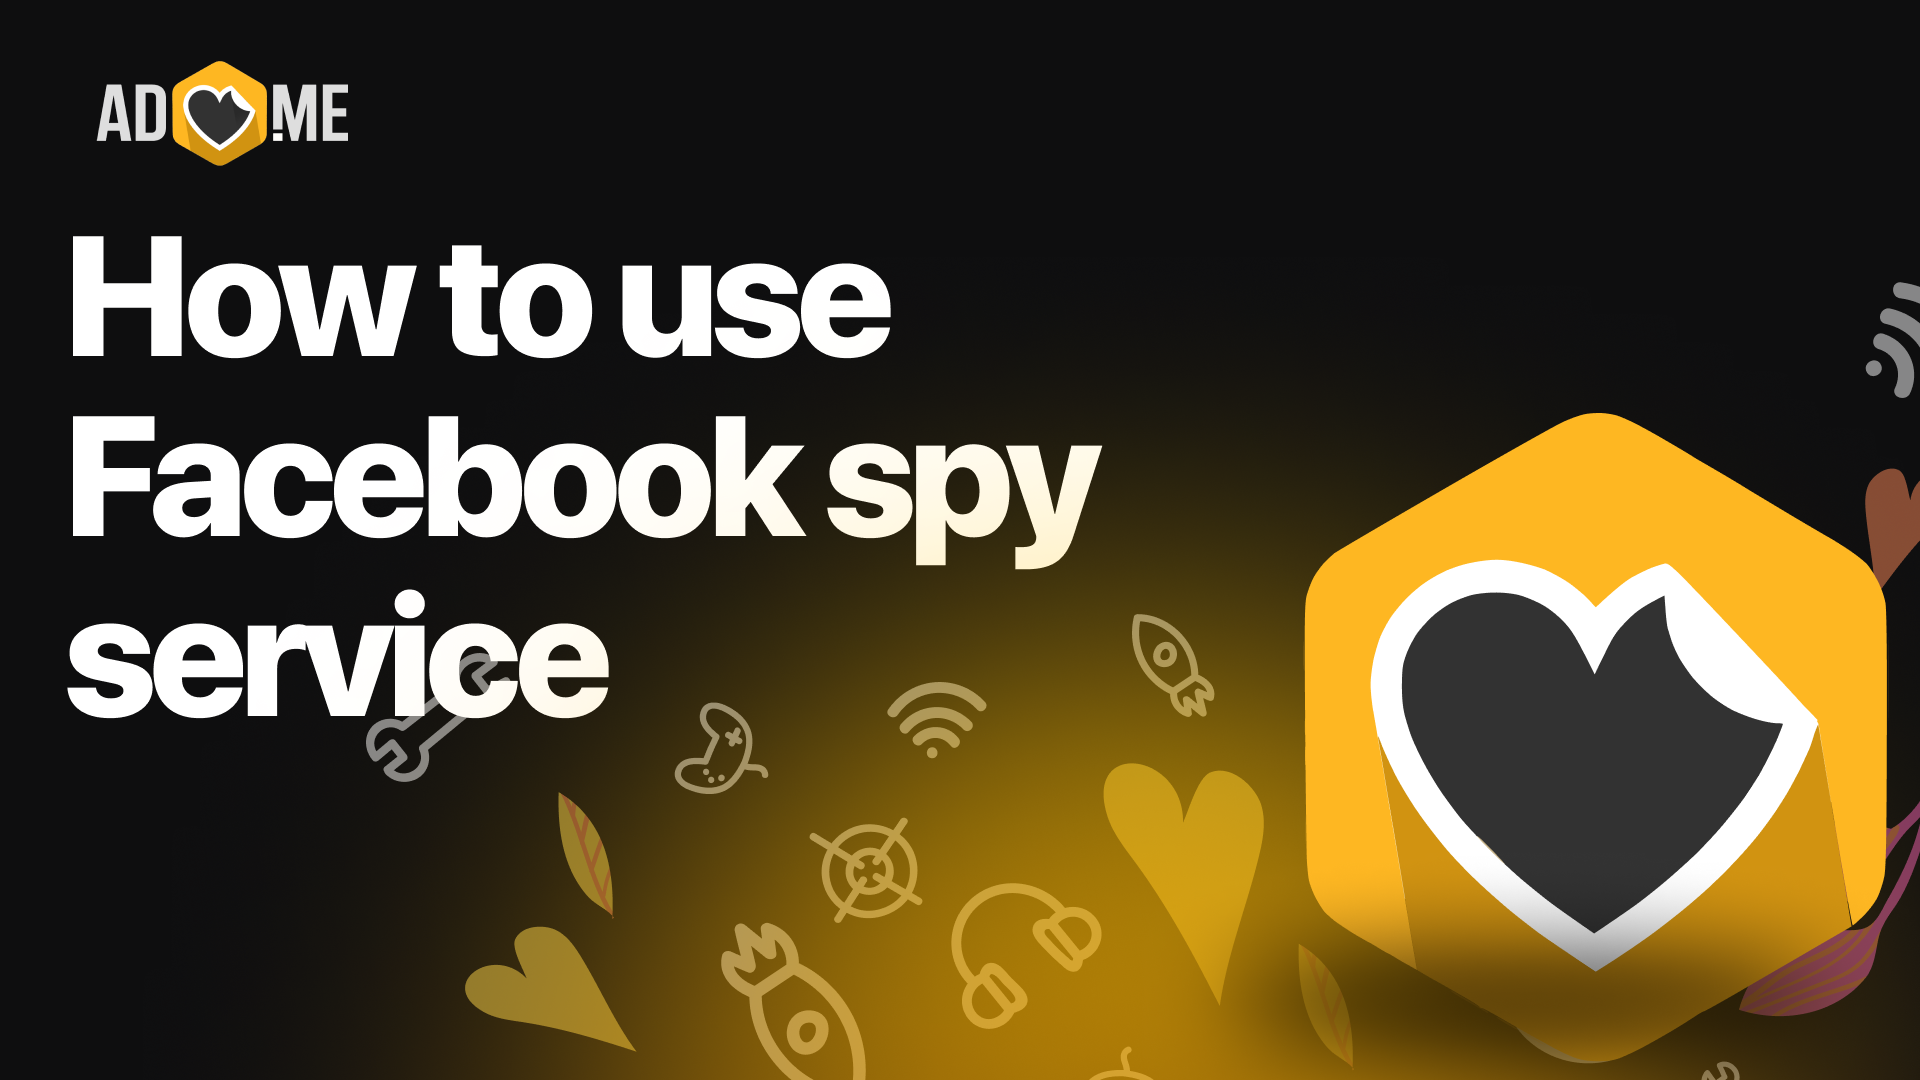 How to use Facebook spy service